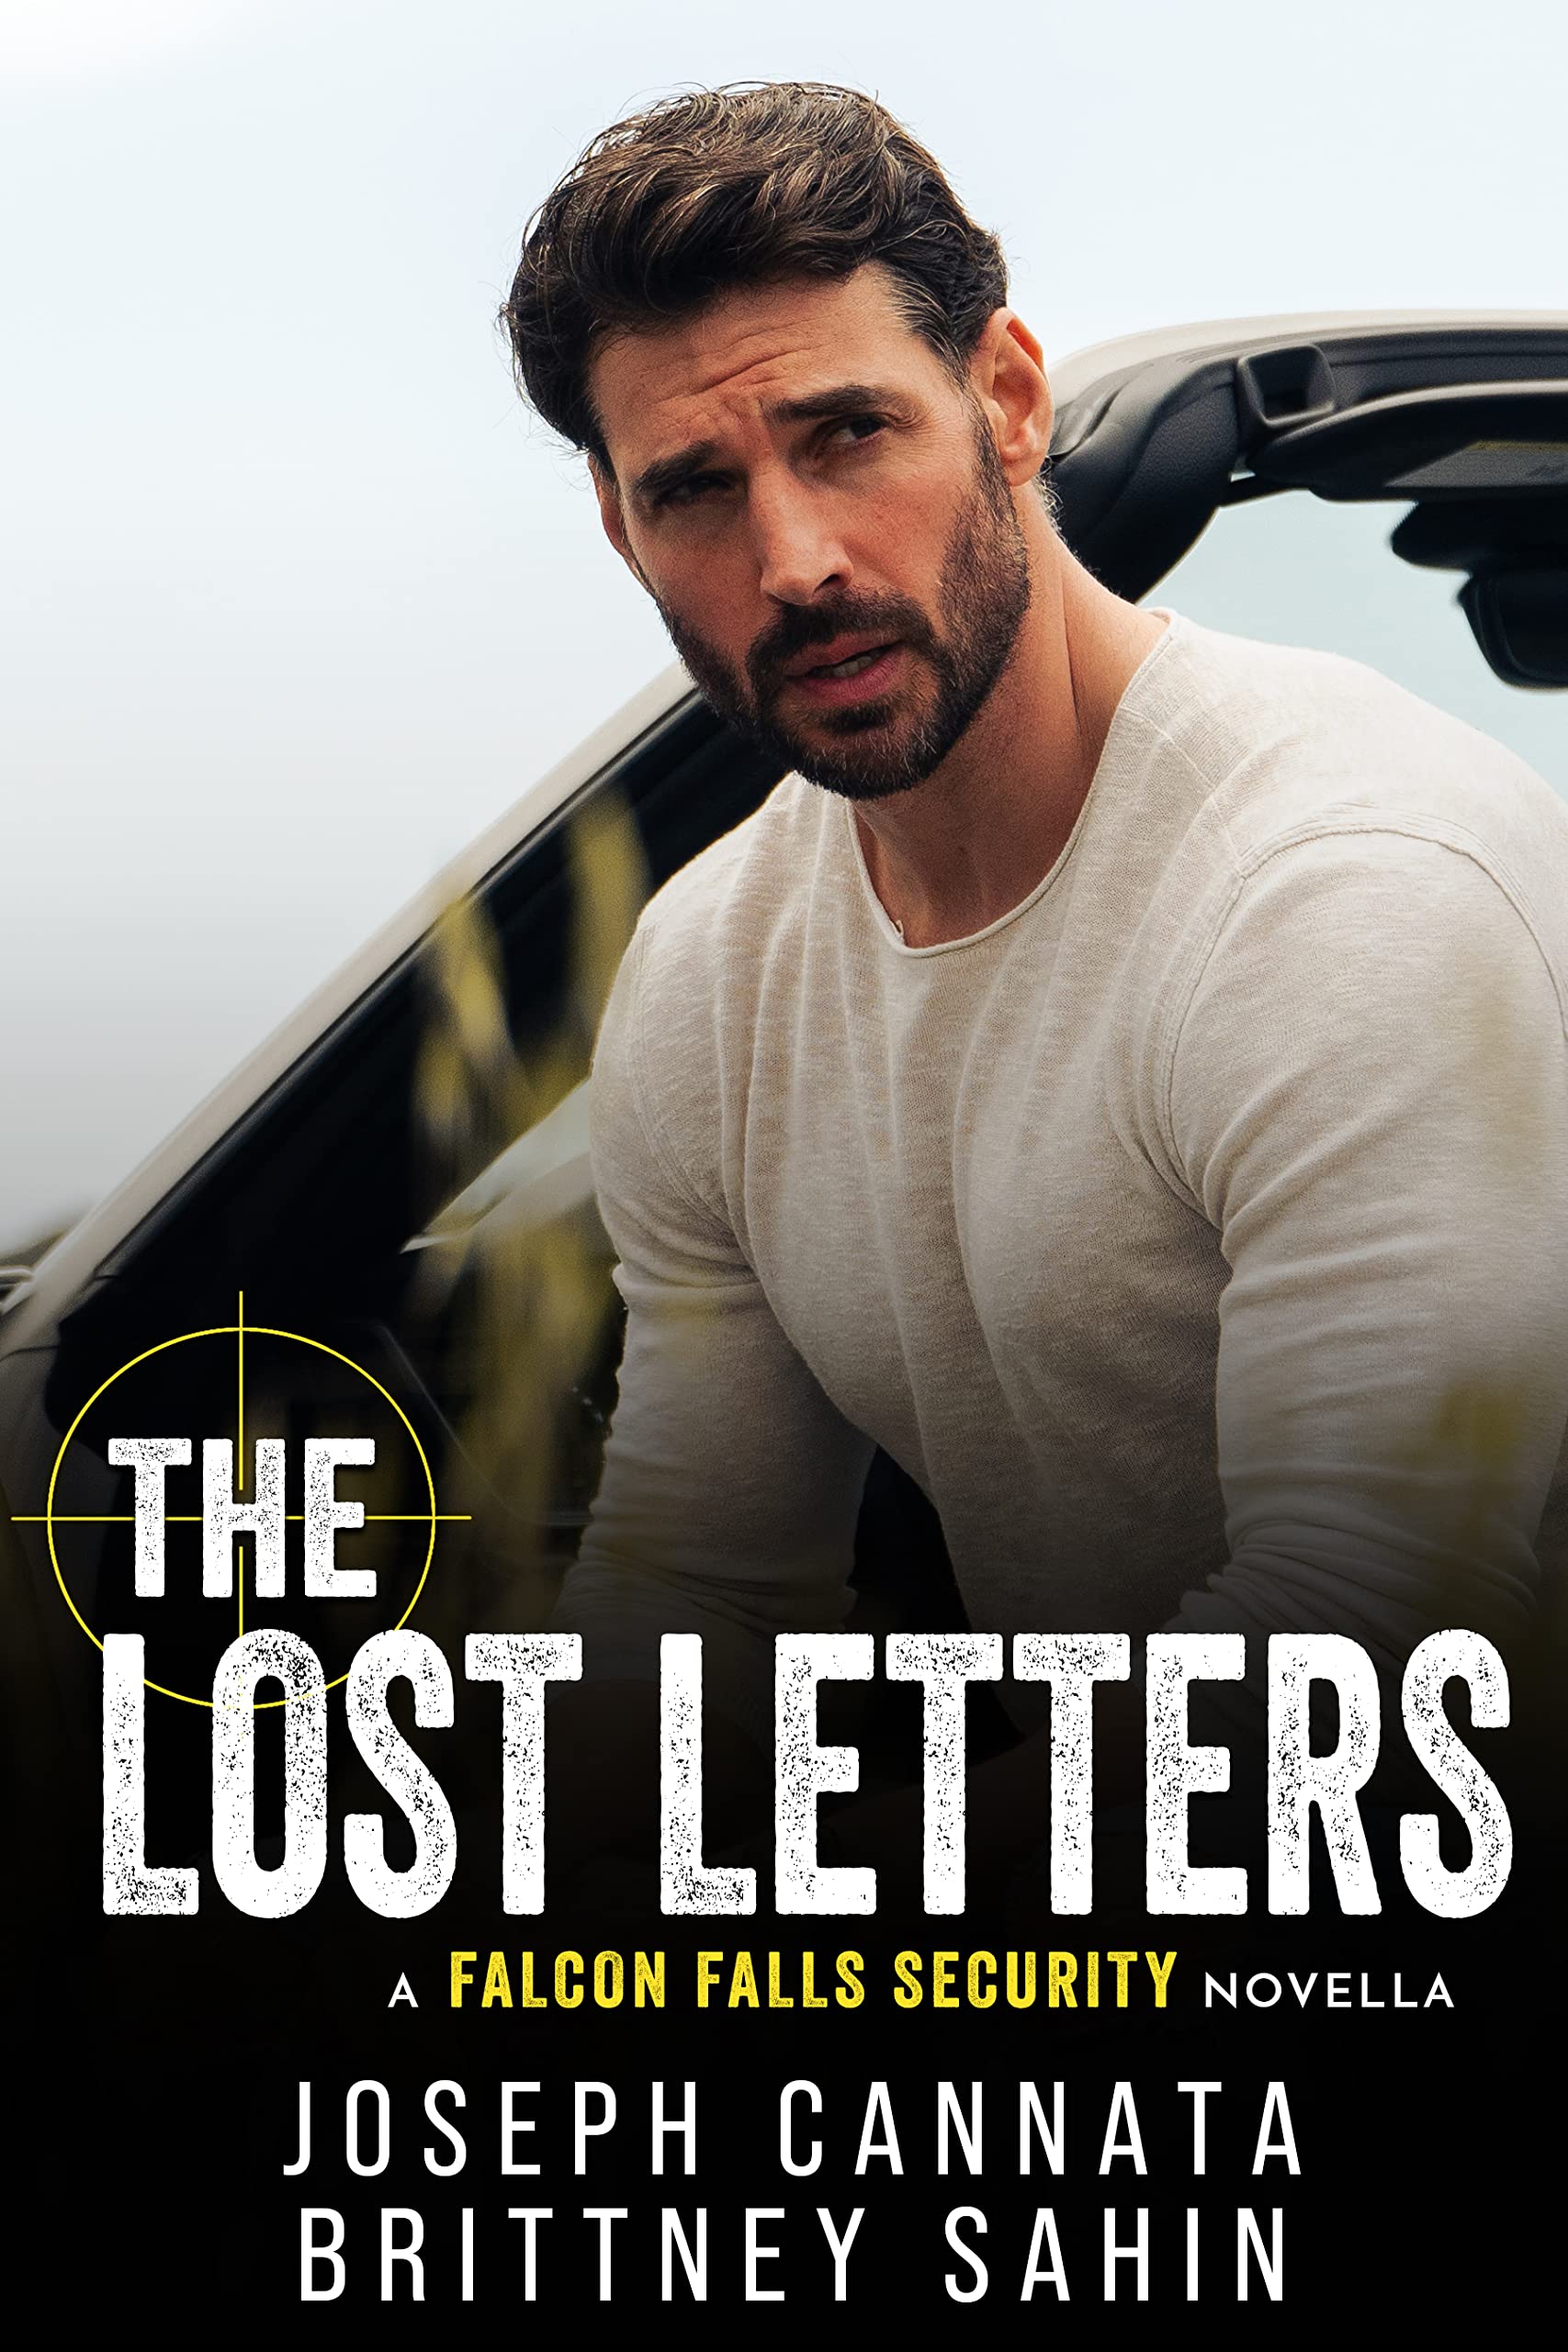 The Lost Letters: A Falcon Falls Security Novella